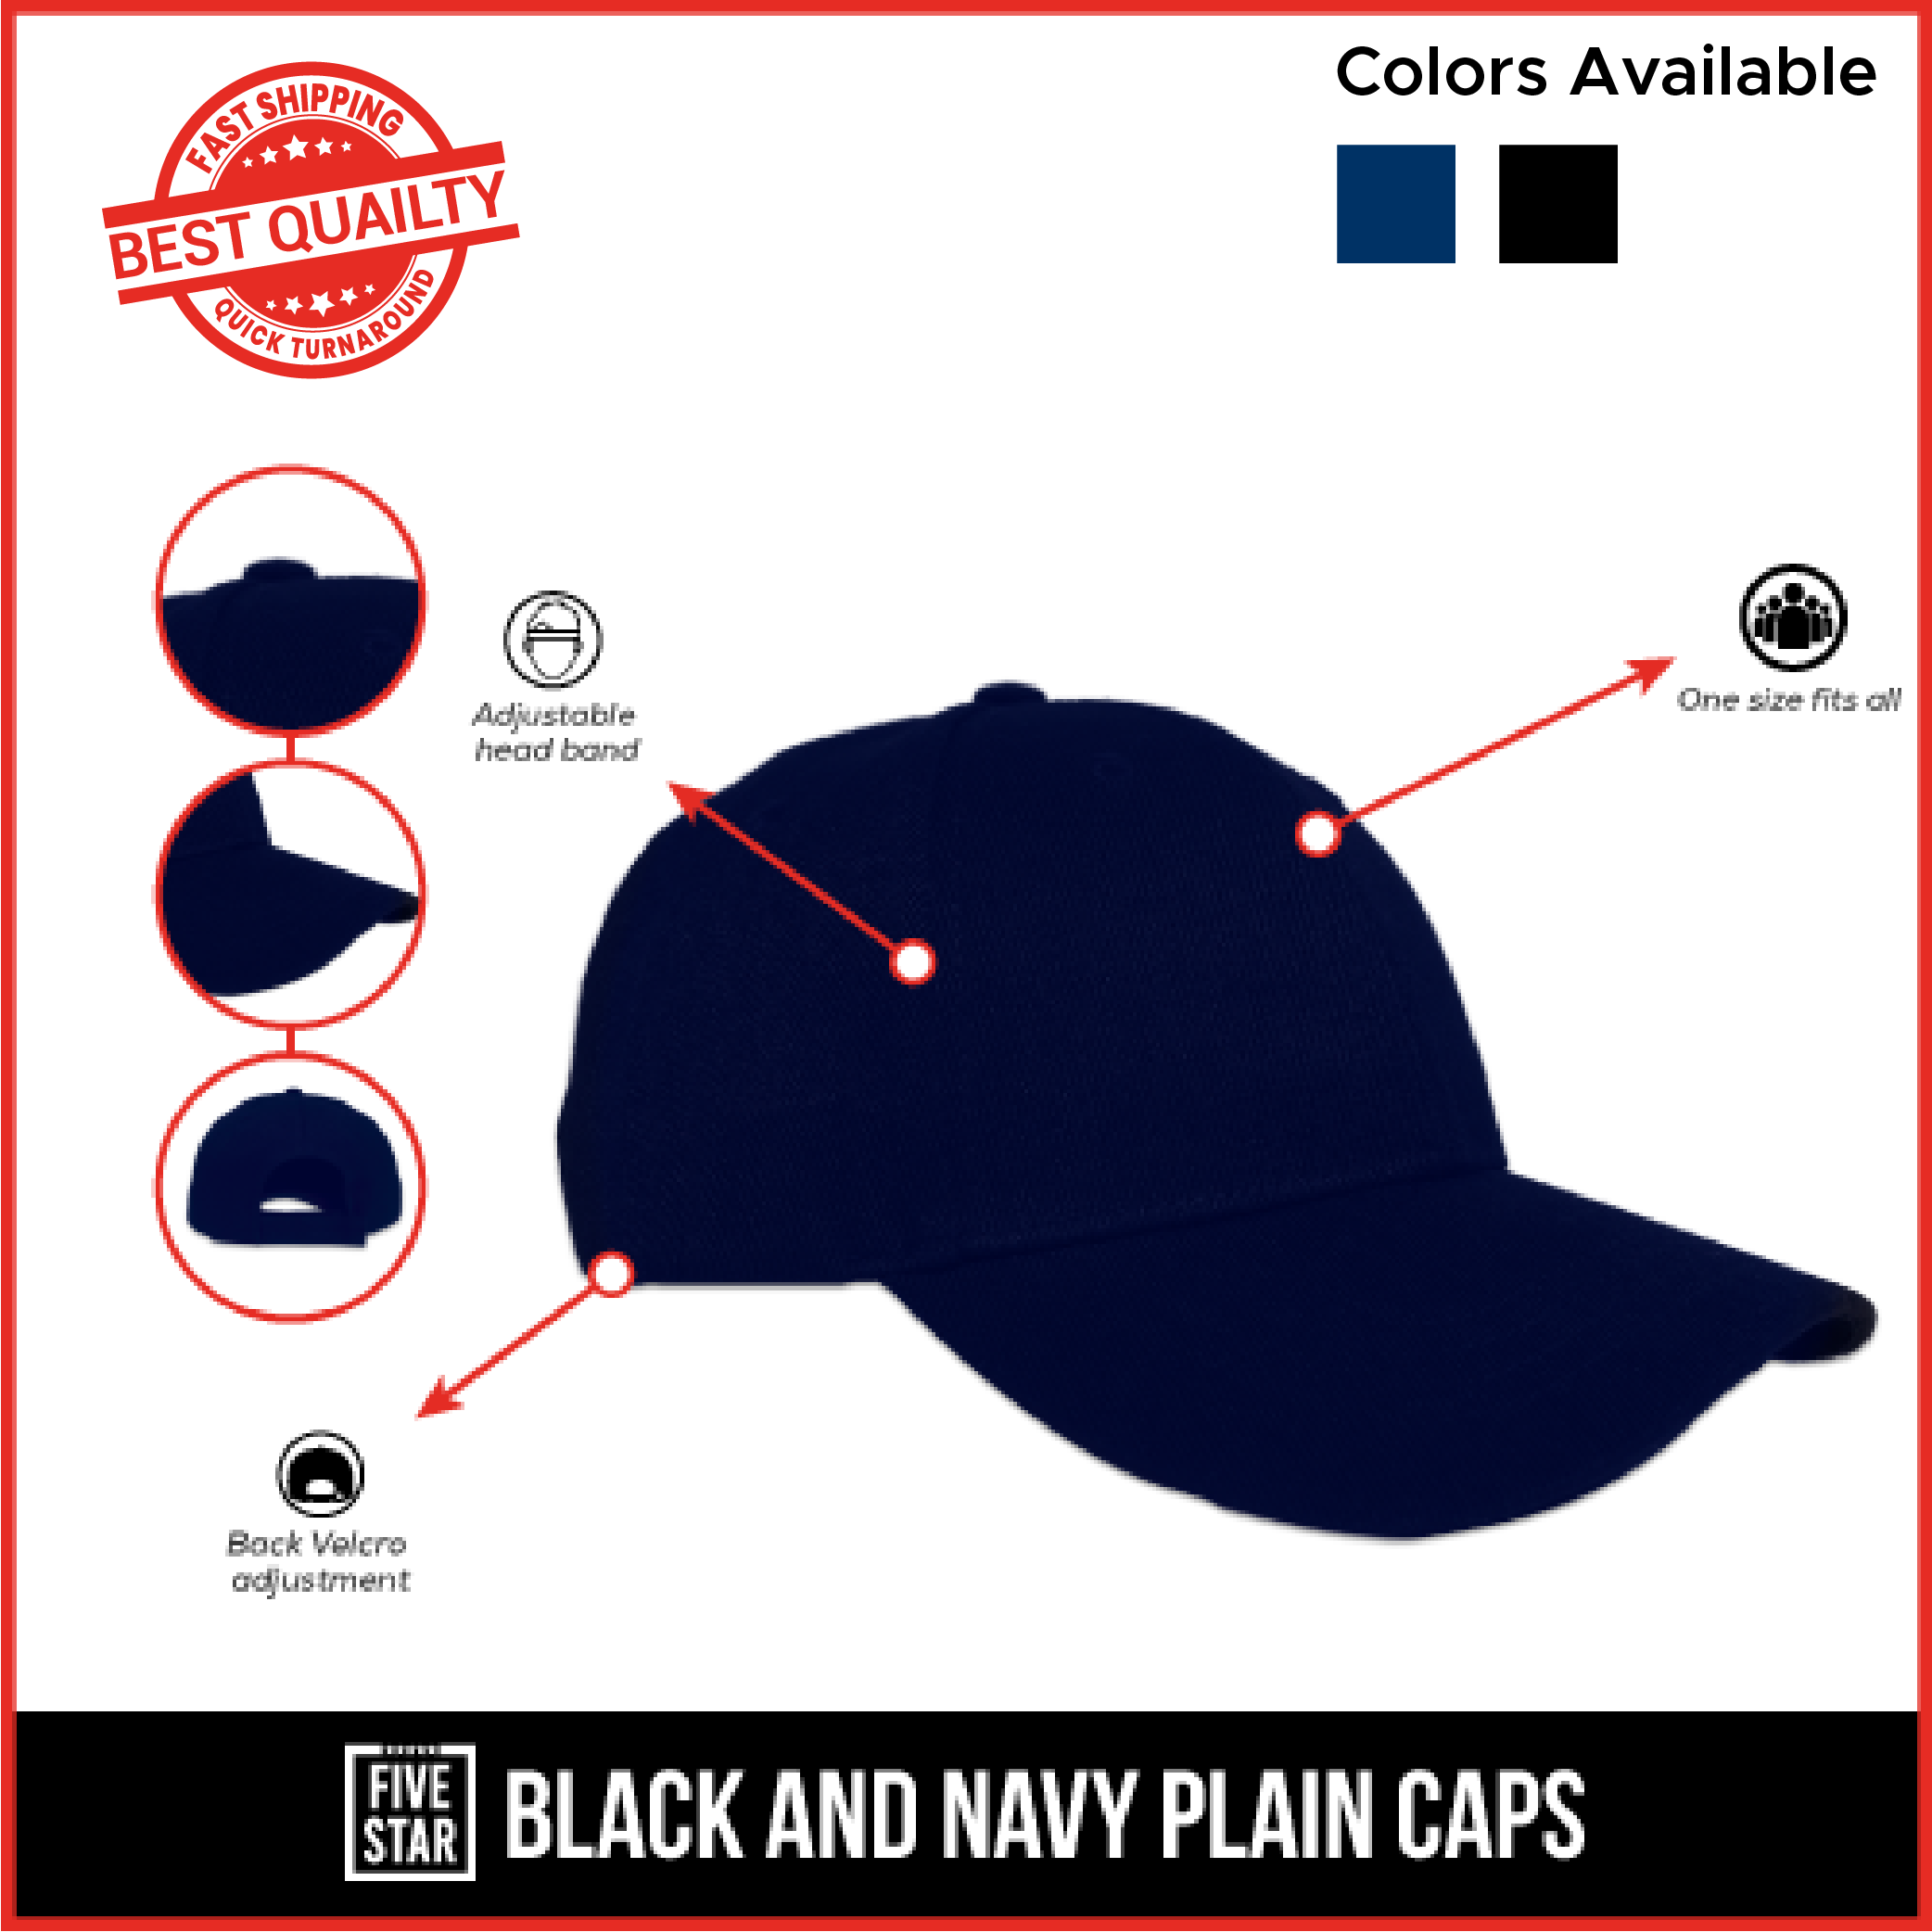 The Difference Between High, Mid & Low Profile Baseball Caps